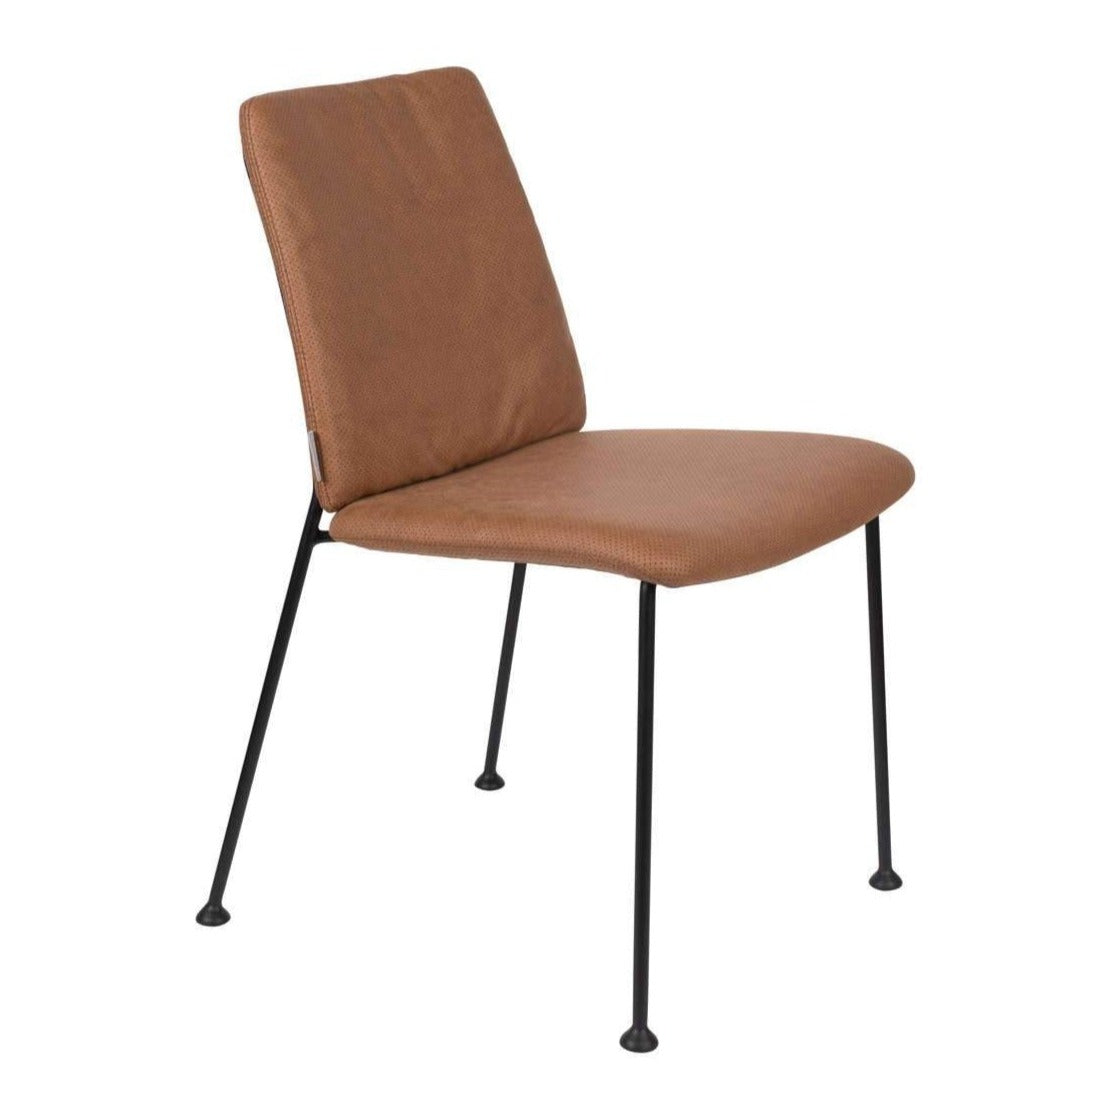 The Fab chair can transform a modern dining room, a classic office and a Scandinavian salon into class with class. This armchair refers to earlier years when his task was only to be comfortable. Now, when the design was focused and appreciated, he gained a new life. Thanks to its minimalist appearance and contrasting comfortable mountain with slender straight legs, it fits almost every space. It enriches them thanks to its subtlety.